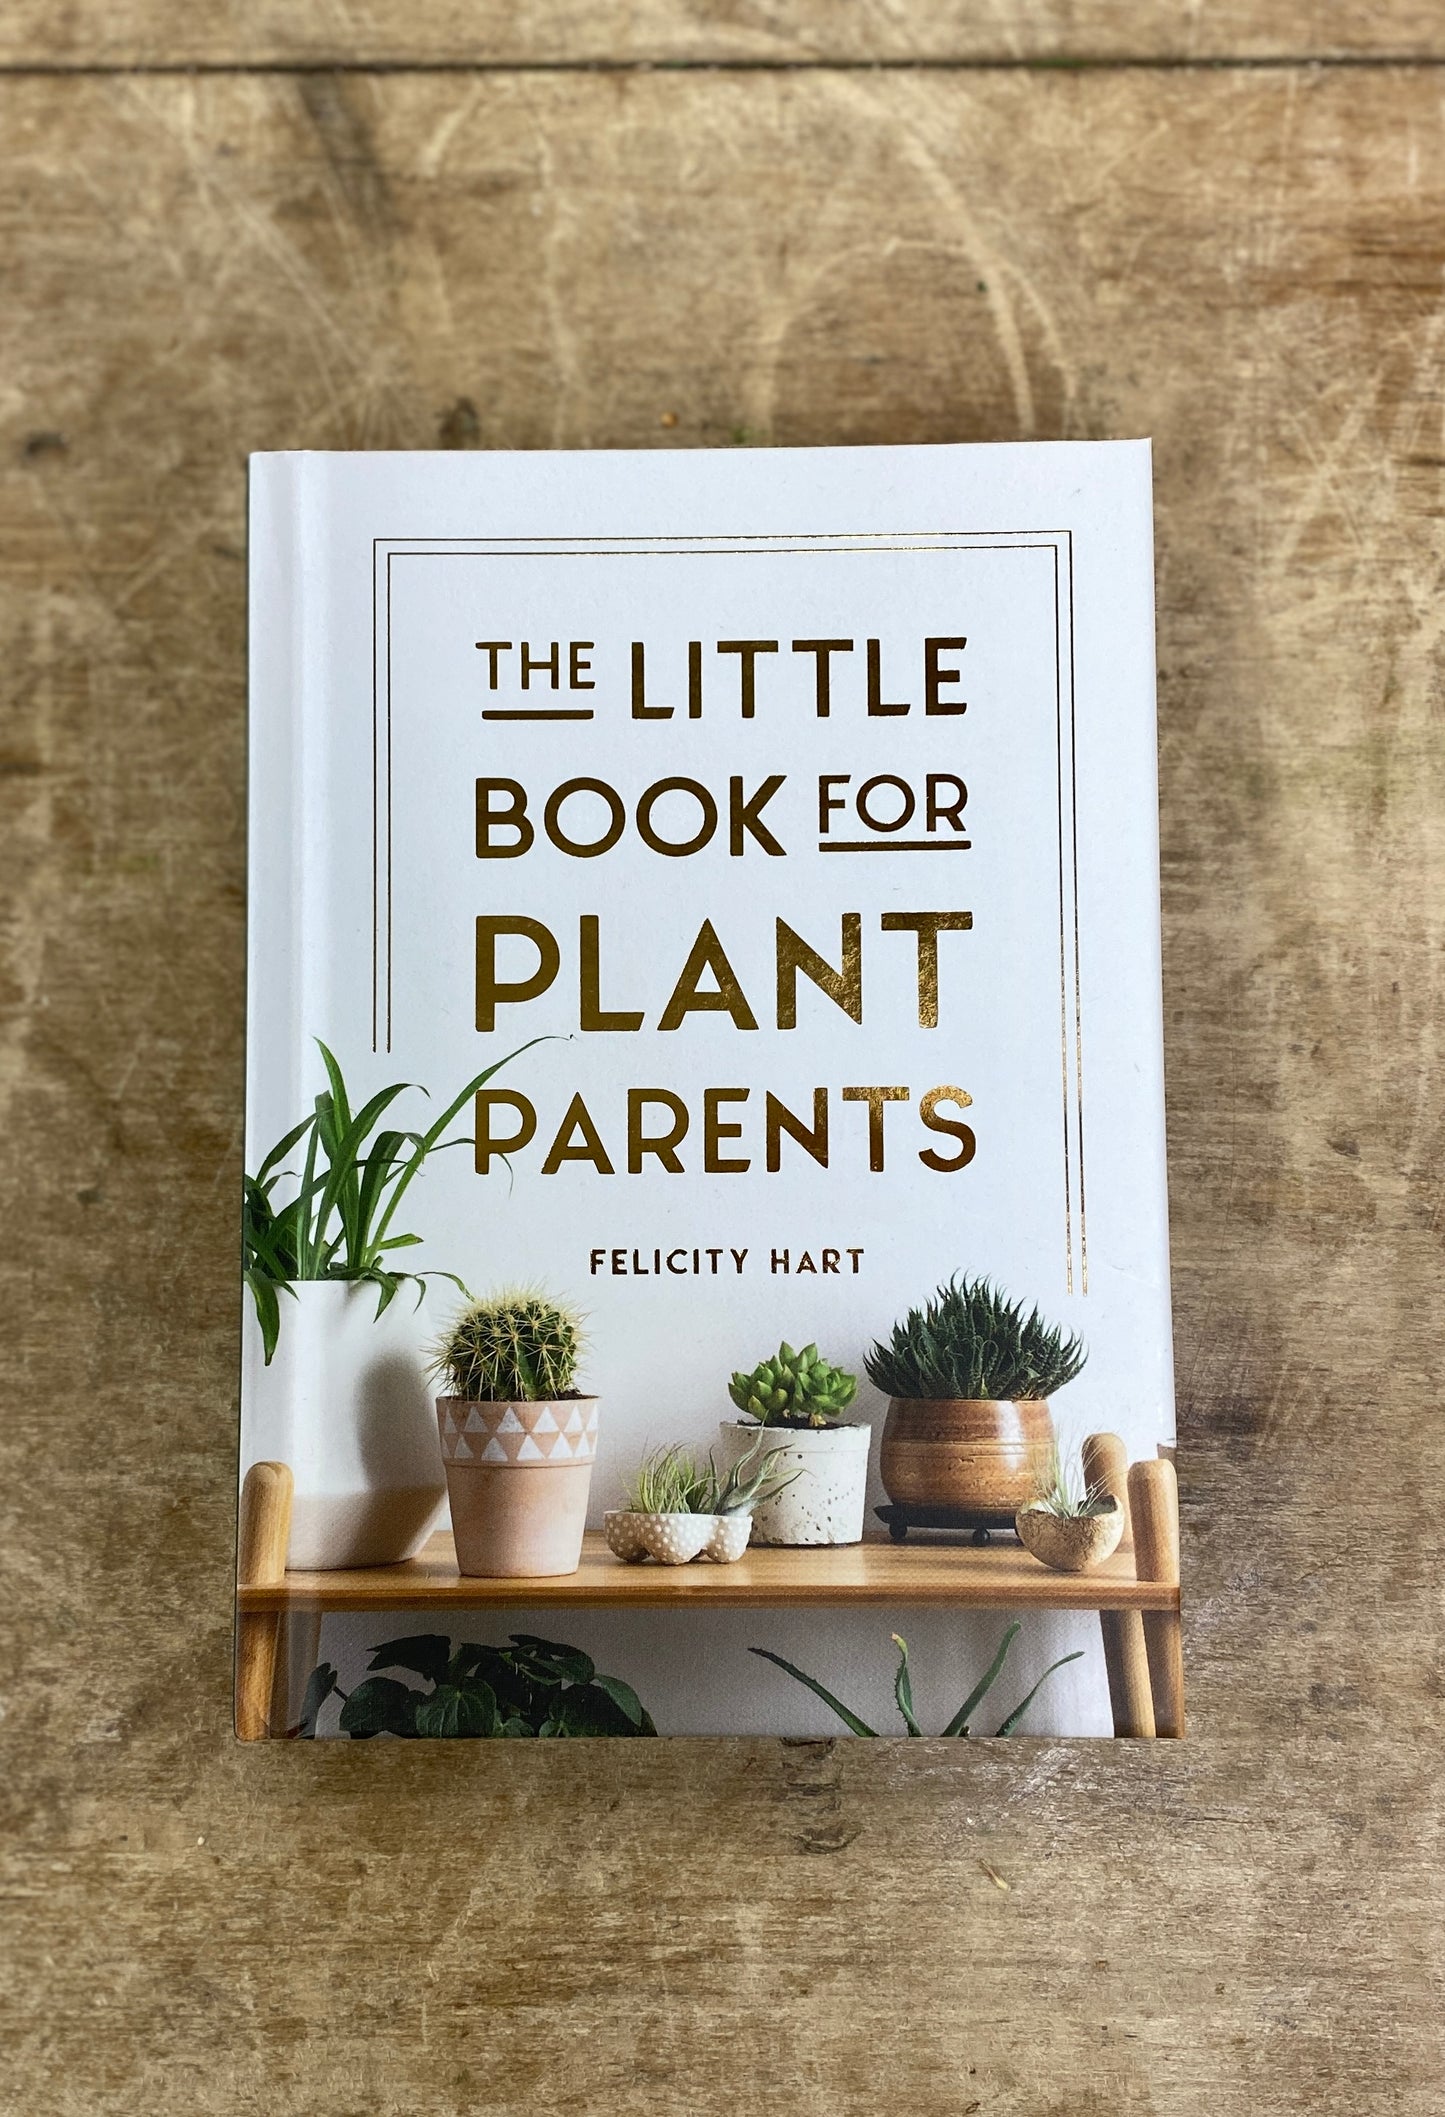 The Little Book For Plant Parents